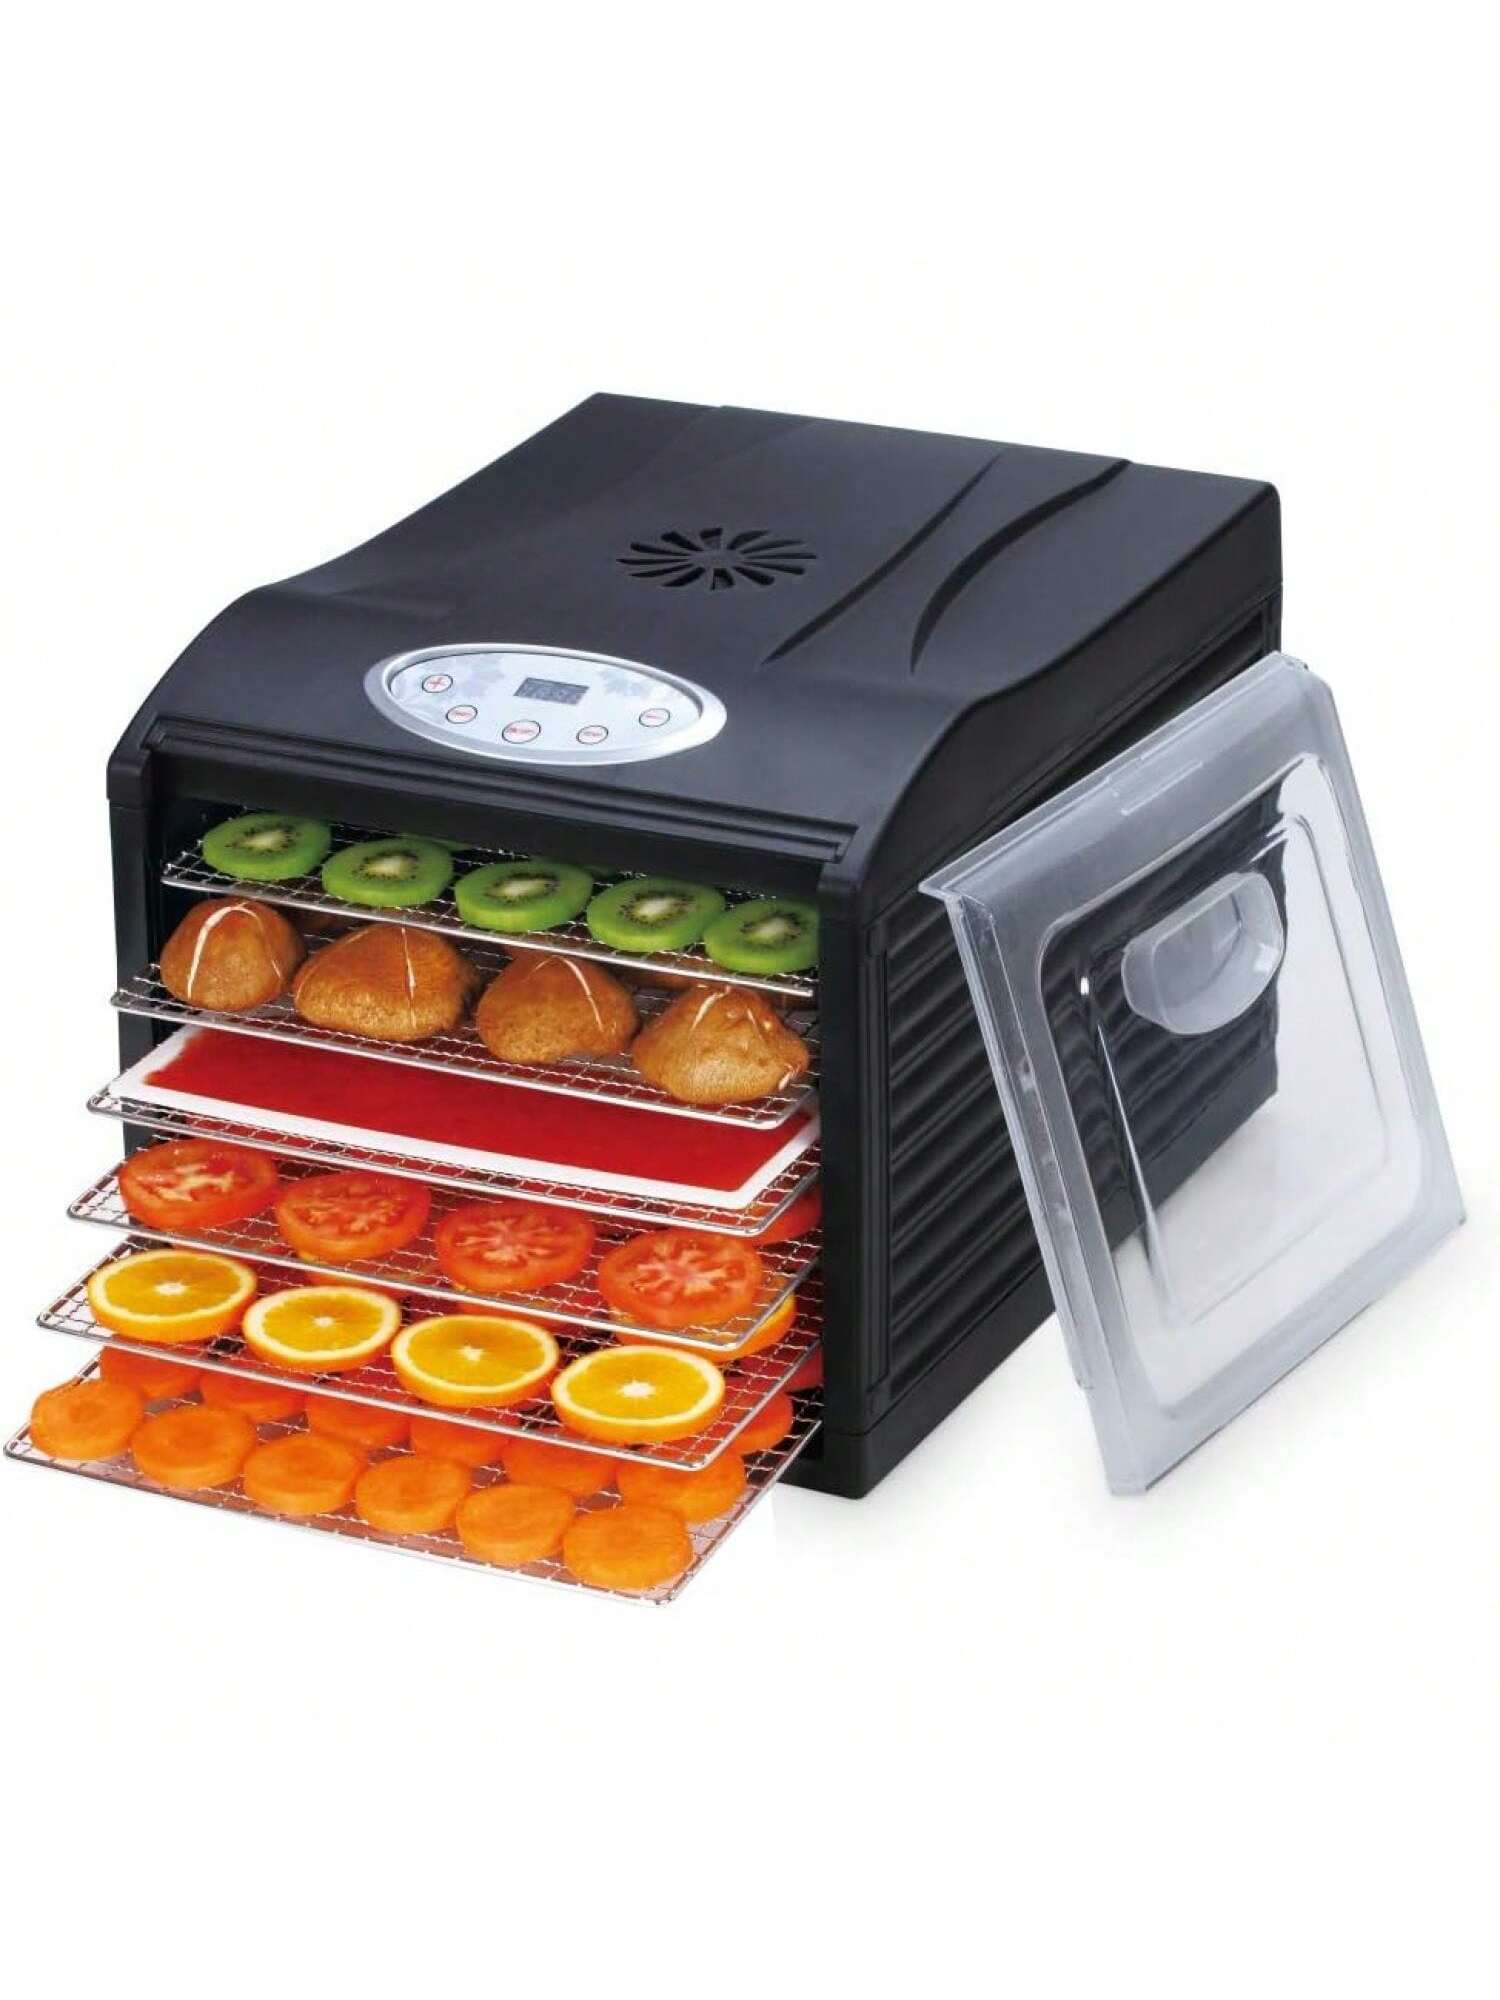 "Silent" Dehydrator with 6 STAINLESS STEEL Trays and Digital Timer and Temperature Control for Fruit, Vegetables, Jerky, s, Dog Treats, Fruit Leathers and More Quiet and Convenient PLUS 6 Silicone Sheets-Multicolor-2